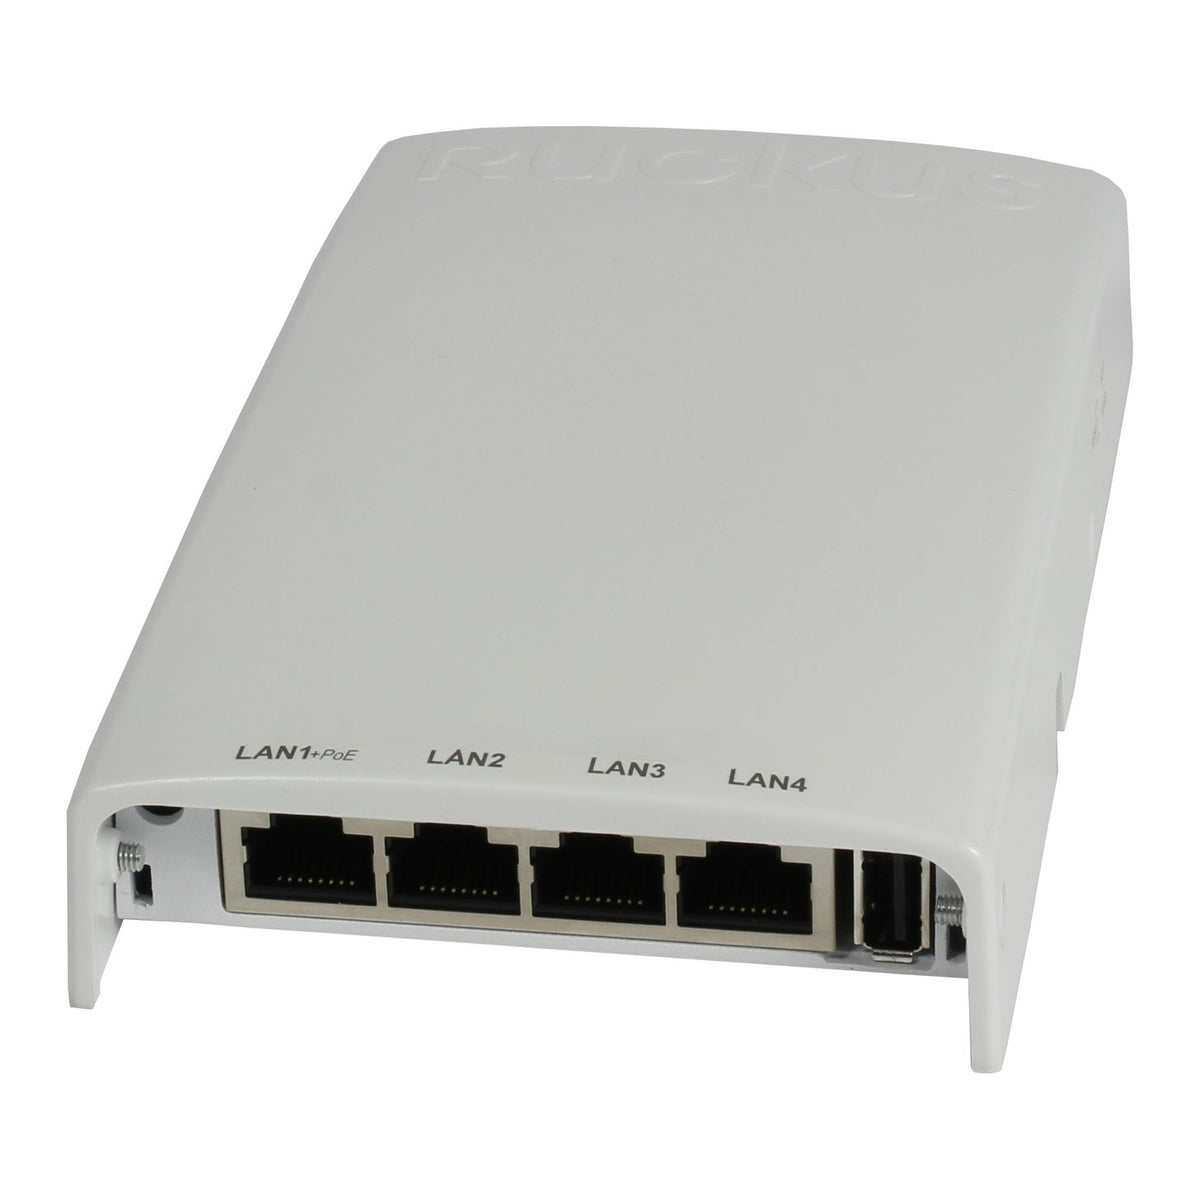 CommScopeRUCKUSZoneFlexH510-802.11acWAVE2MU-MIMO CommScope RUCKUS ZoneFlex H510- 802.11ac WAVE 2 MU-MIMO Dual-Band simultan 2,4 GHz &amp; 5 GHz router commscope Ruckus switches WIFI wifi 6 router WLAN WLAN-Router